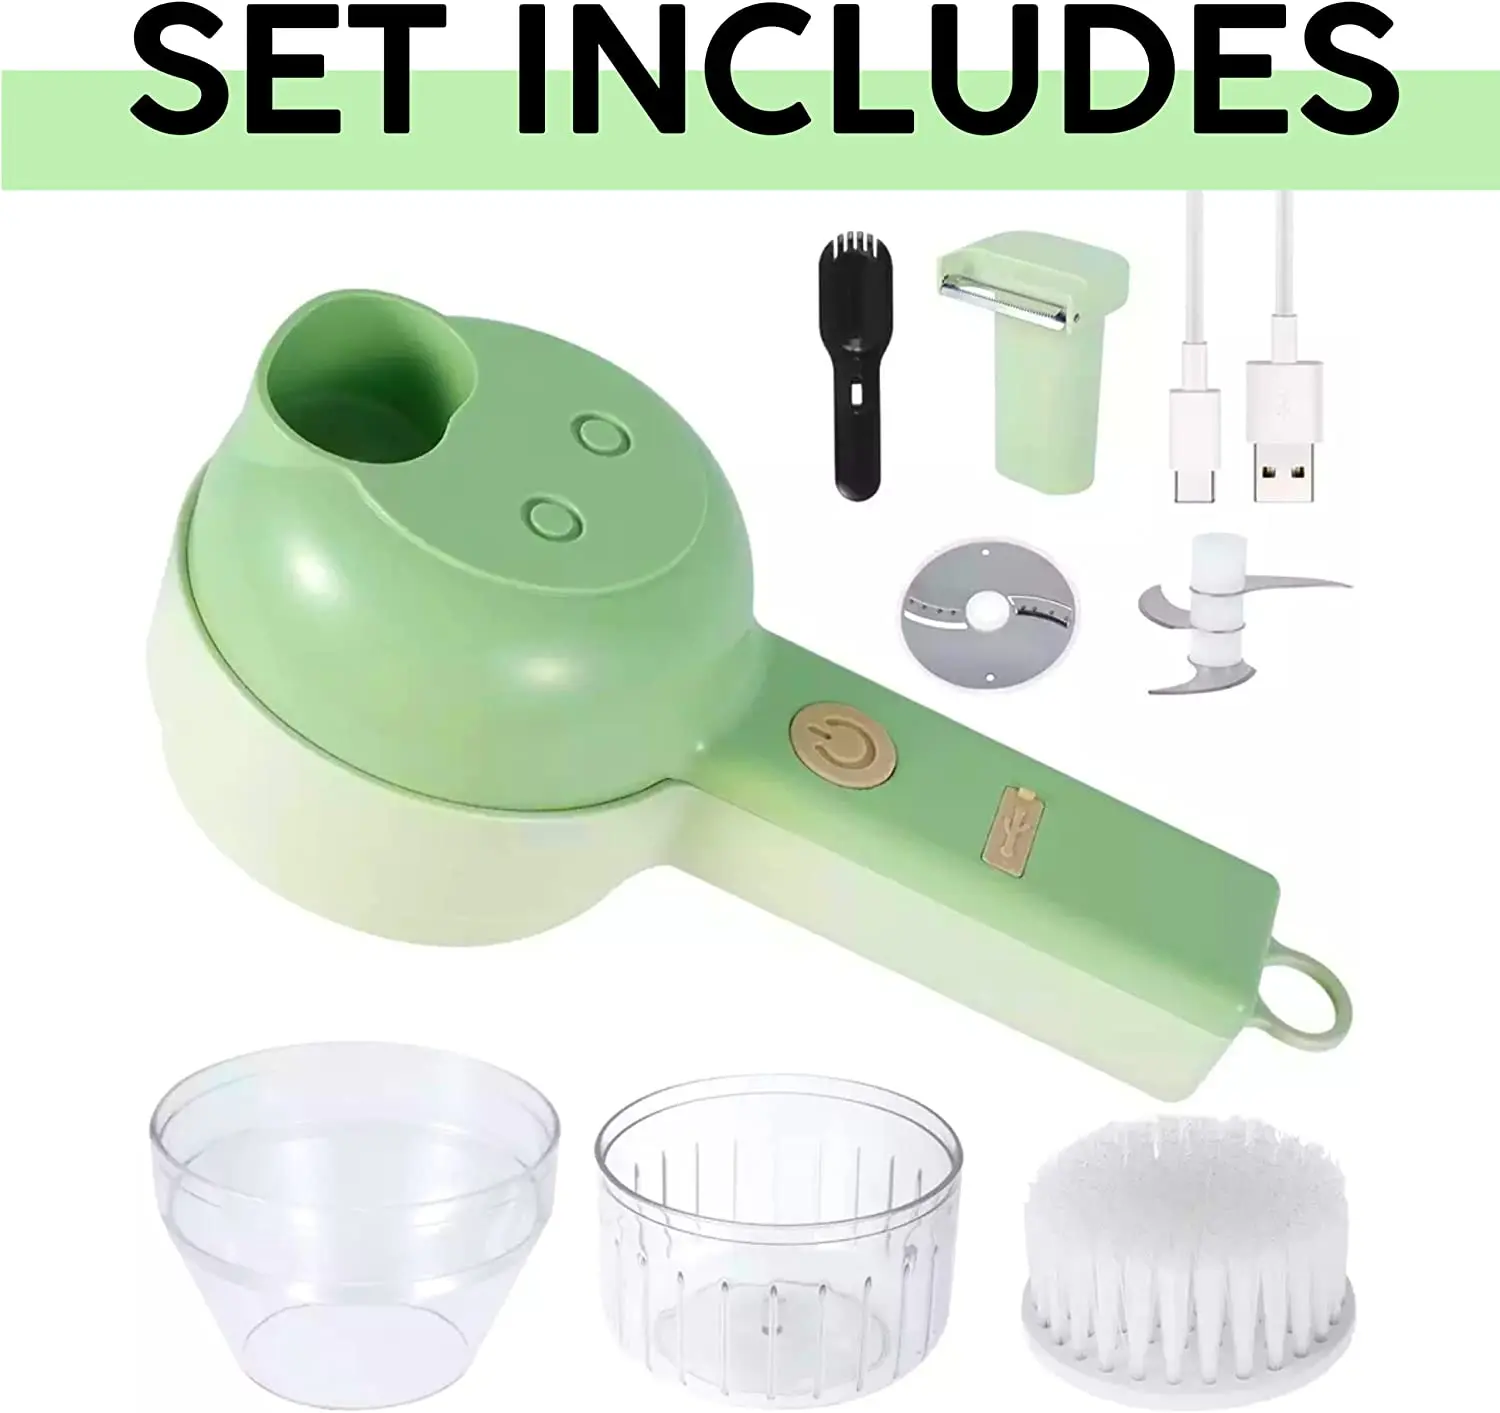 4-in-1 Portable Electric Vegetable Cutter Set: A wireless food processor with stainless steel blades, designed for effortless chopping of garlic, chili pepper, onion, ginger, celery, and meat. Streamline your kitchen prep with this versatile and innovative culinary tool